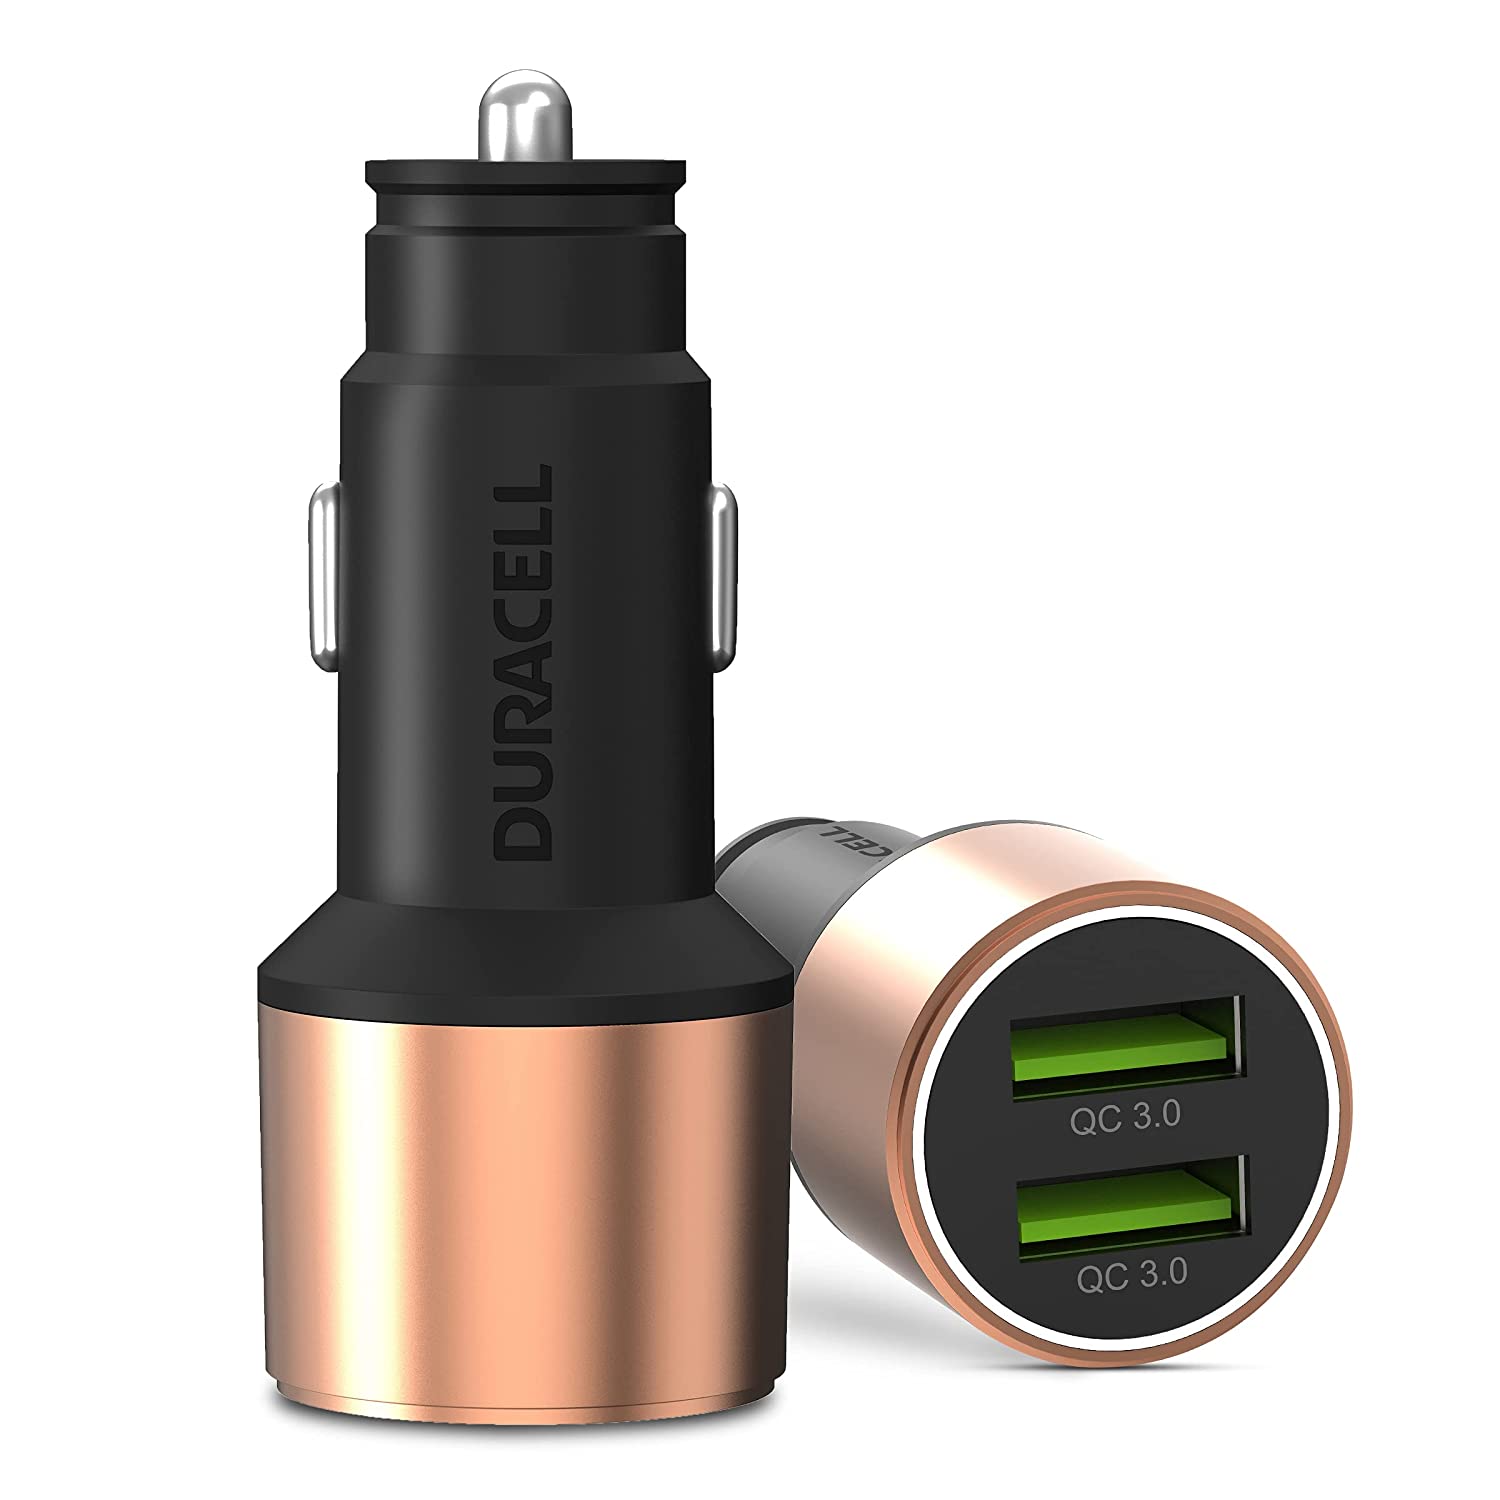 Duracell 36W Fast Car Charger Adapter with Dual USB Port.